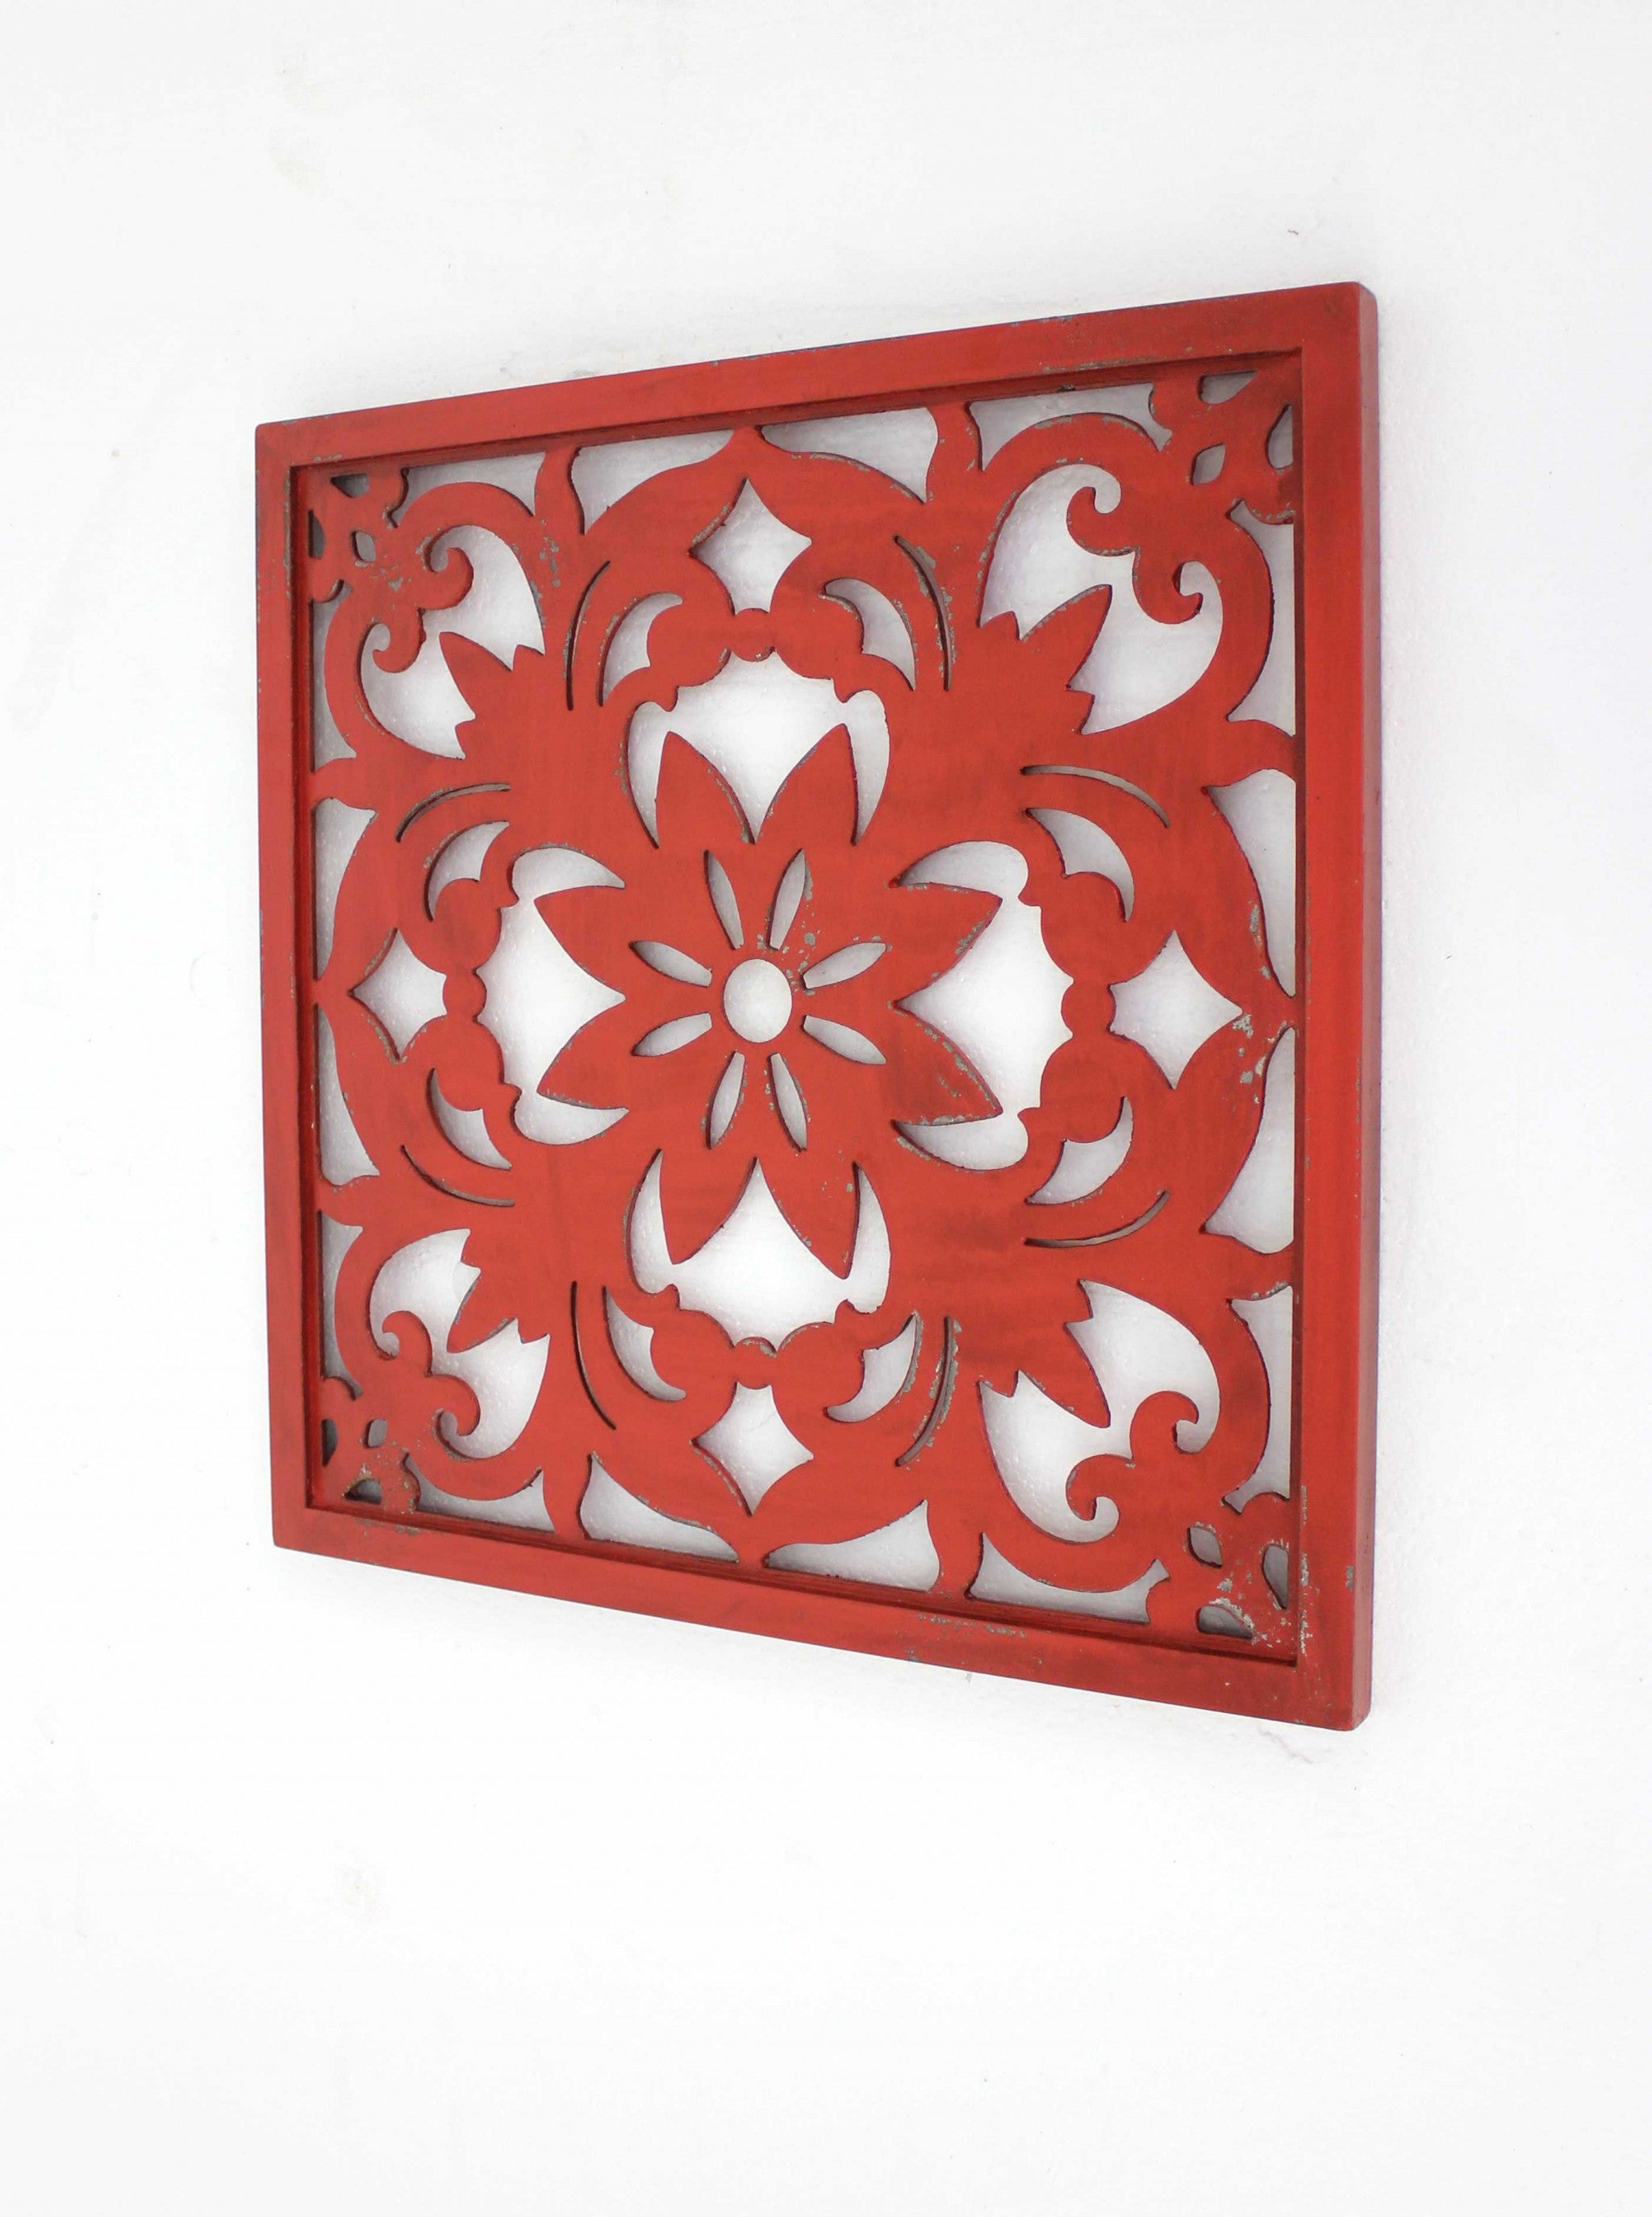 24" X 24" X 1" Red Vintage Floral - Wall Plaque